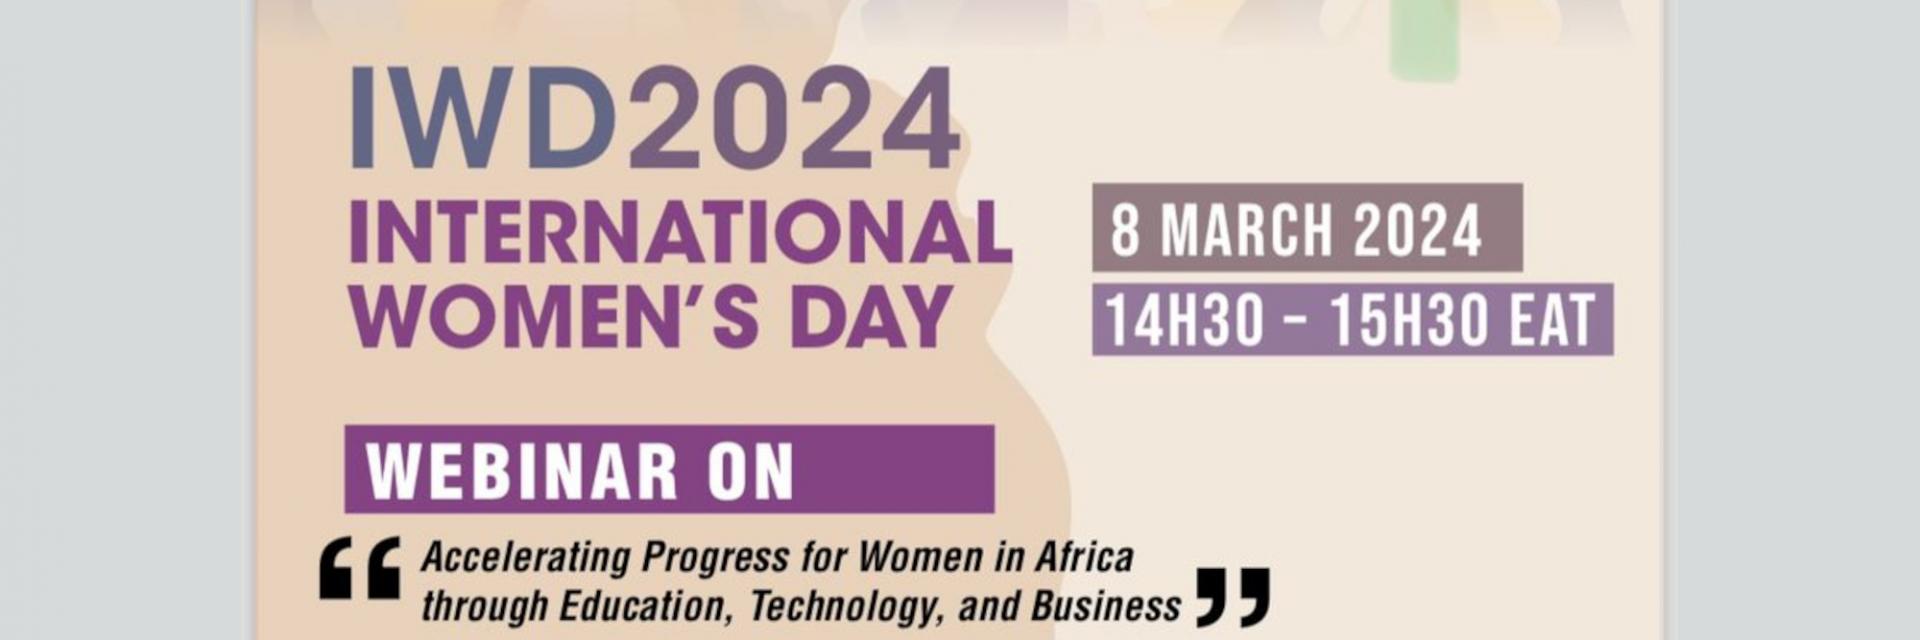 International Women's Day Webinar Jointly hosted by the Commonwealth Business Women - Africa and the Economic Commission for Africa's Digital Centre of Excellence